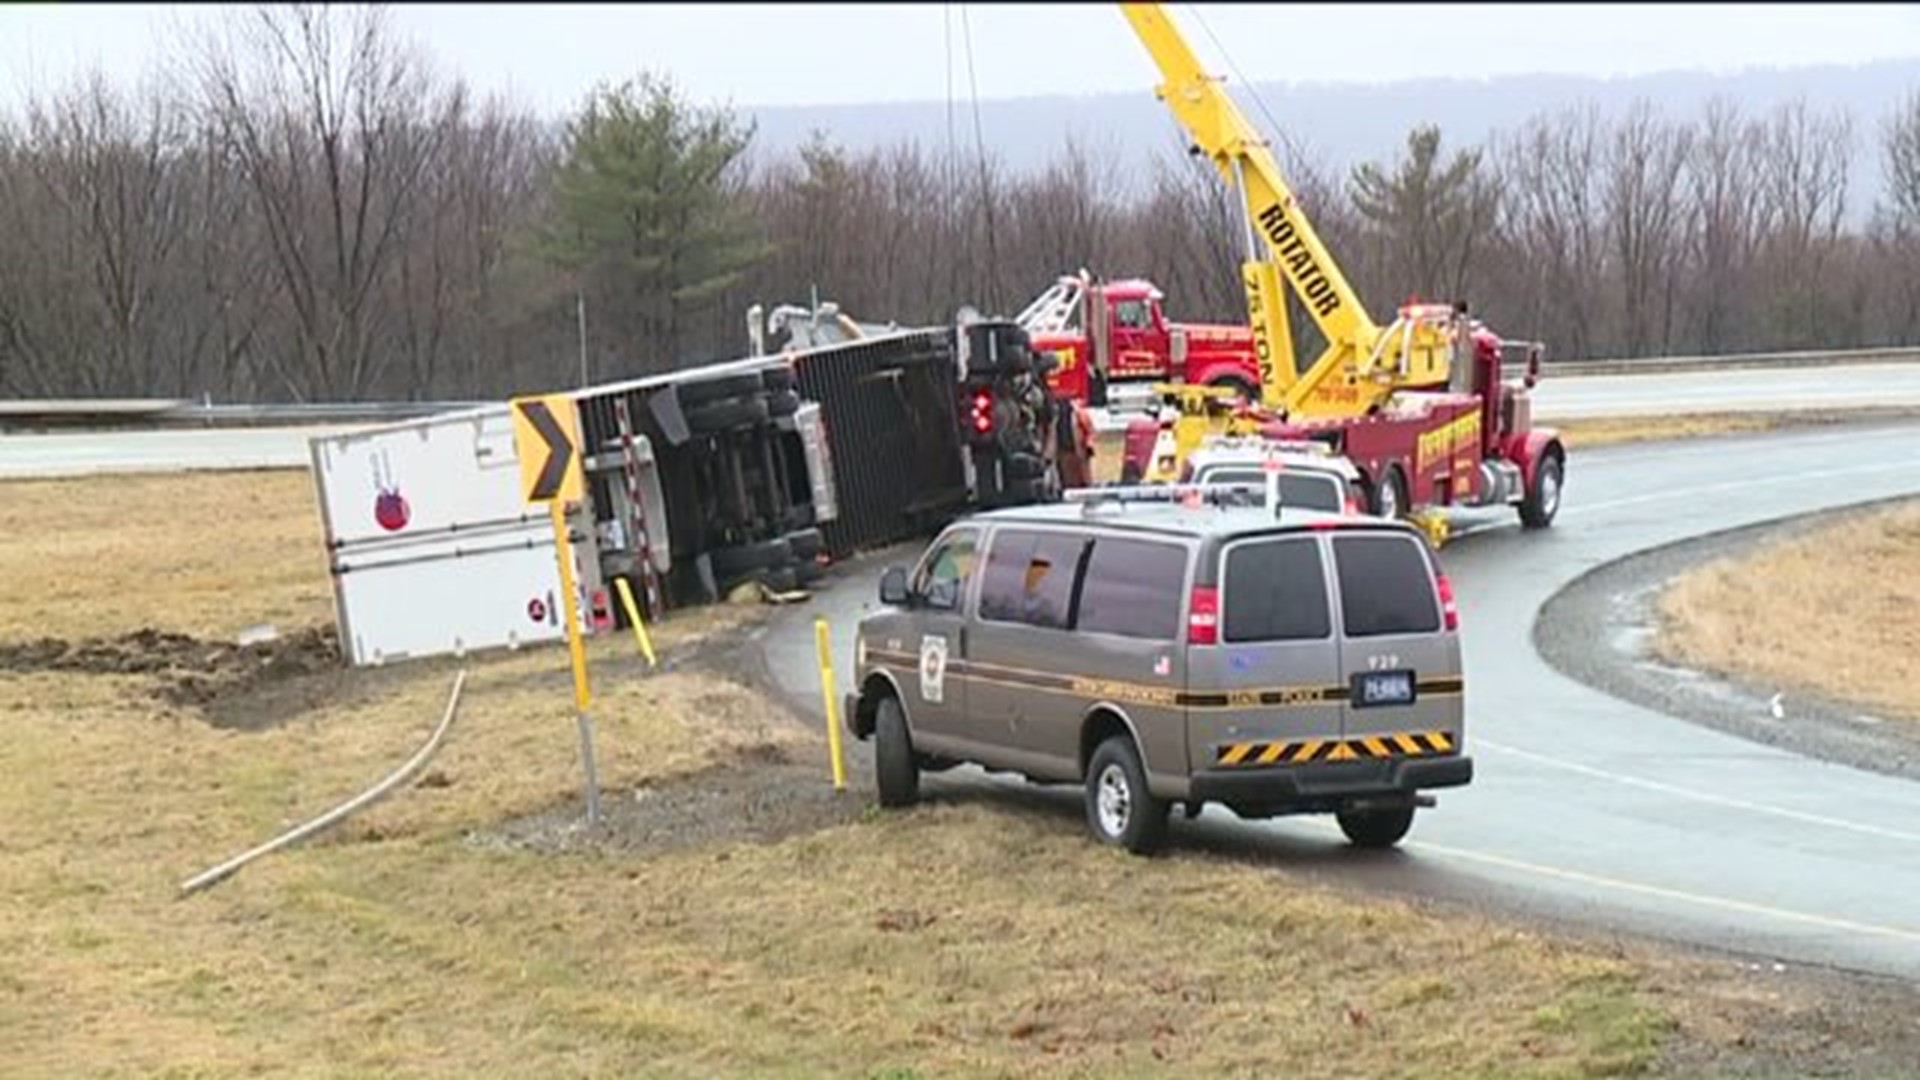 Highway Ramp Closed by Rig Rollover